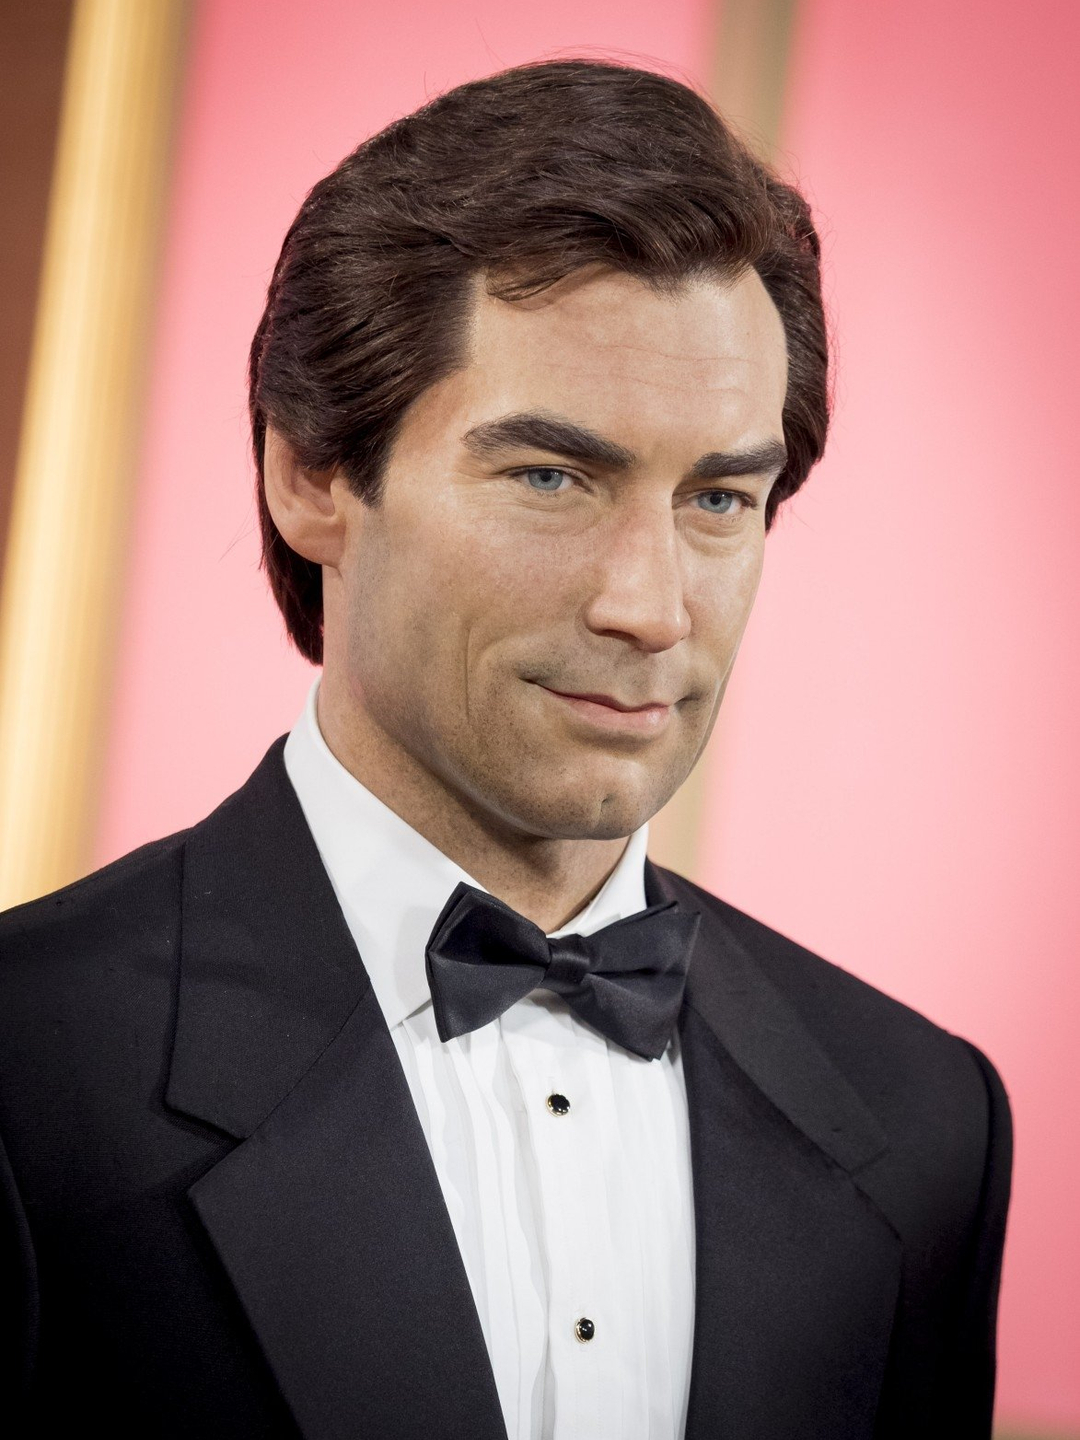 Timothy Dalton in his youth